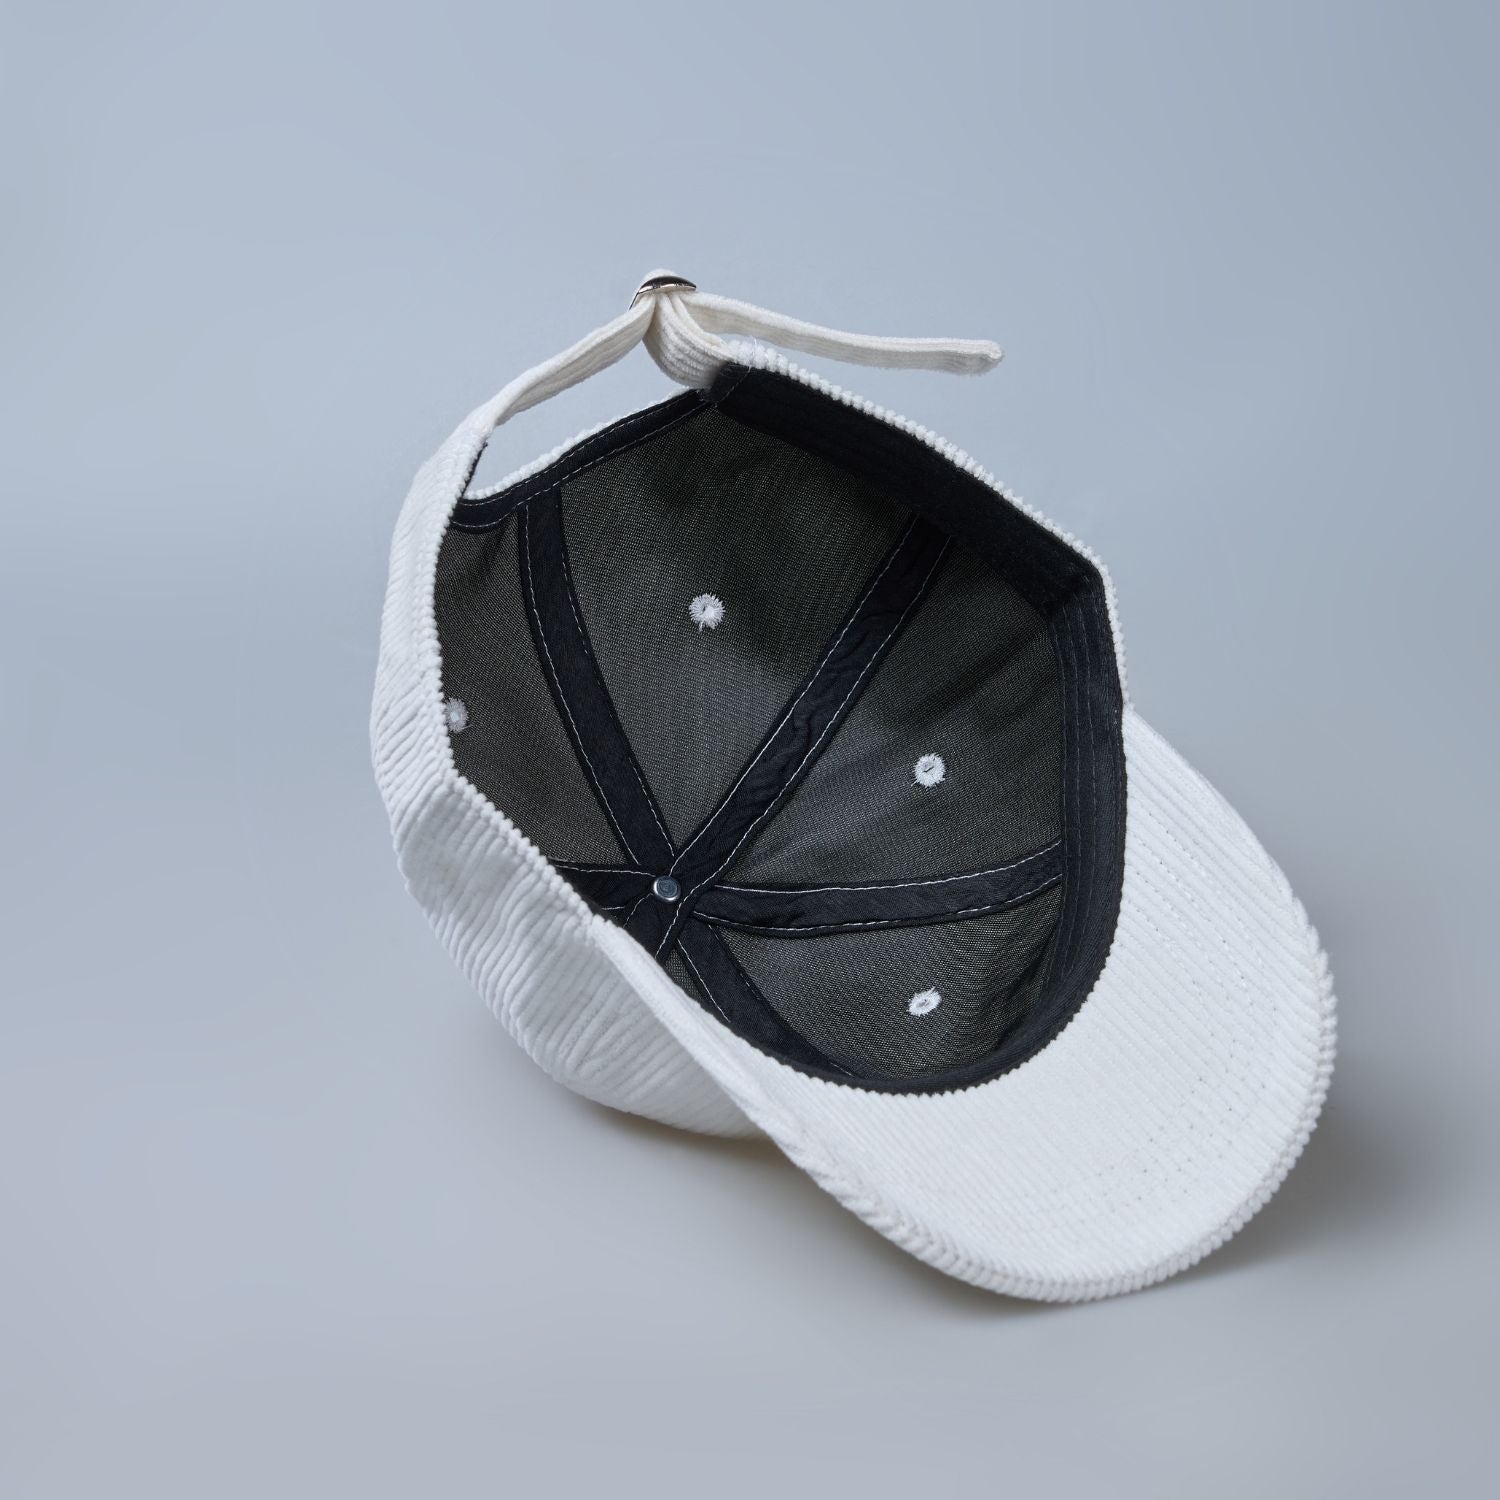 White colored cap for men with 'what' text written on it, inside view.